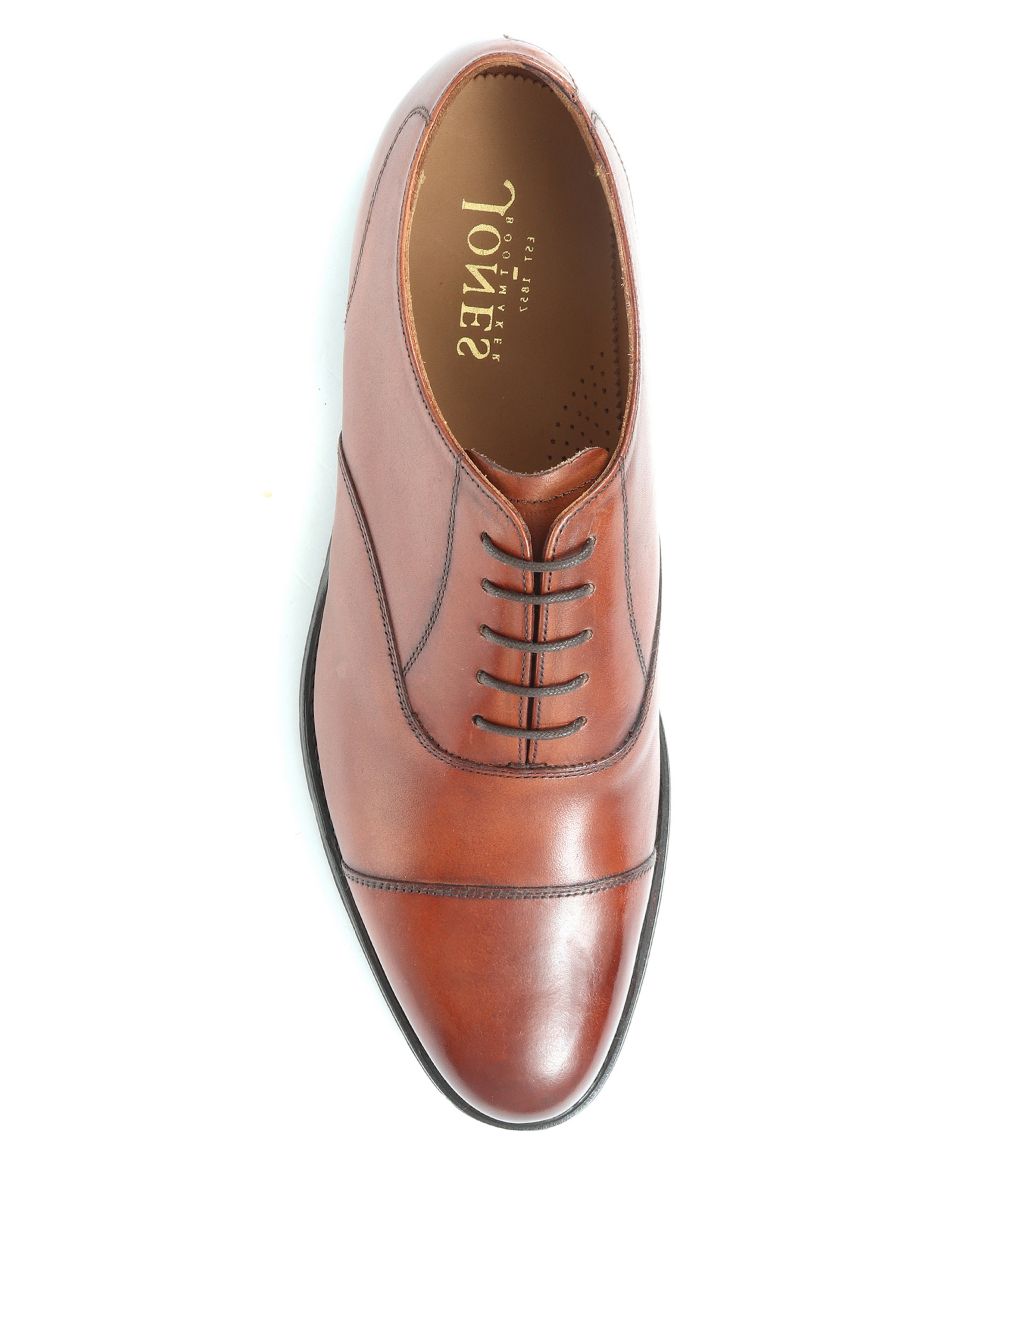 Leather Goodyear Welted Oxford Shoes image 5